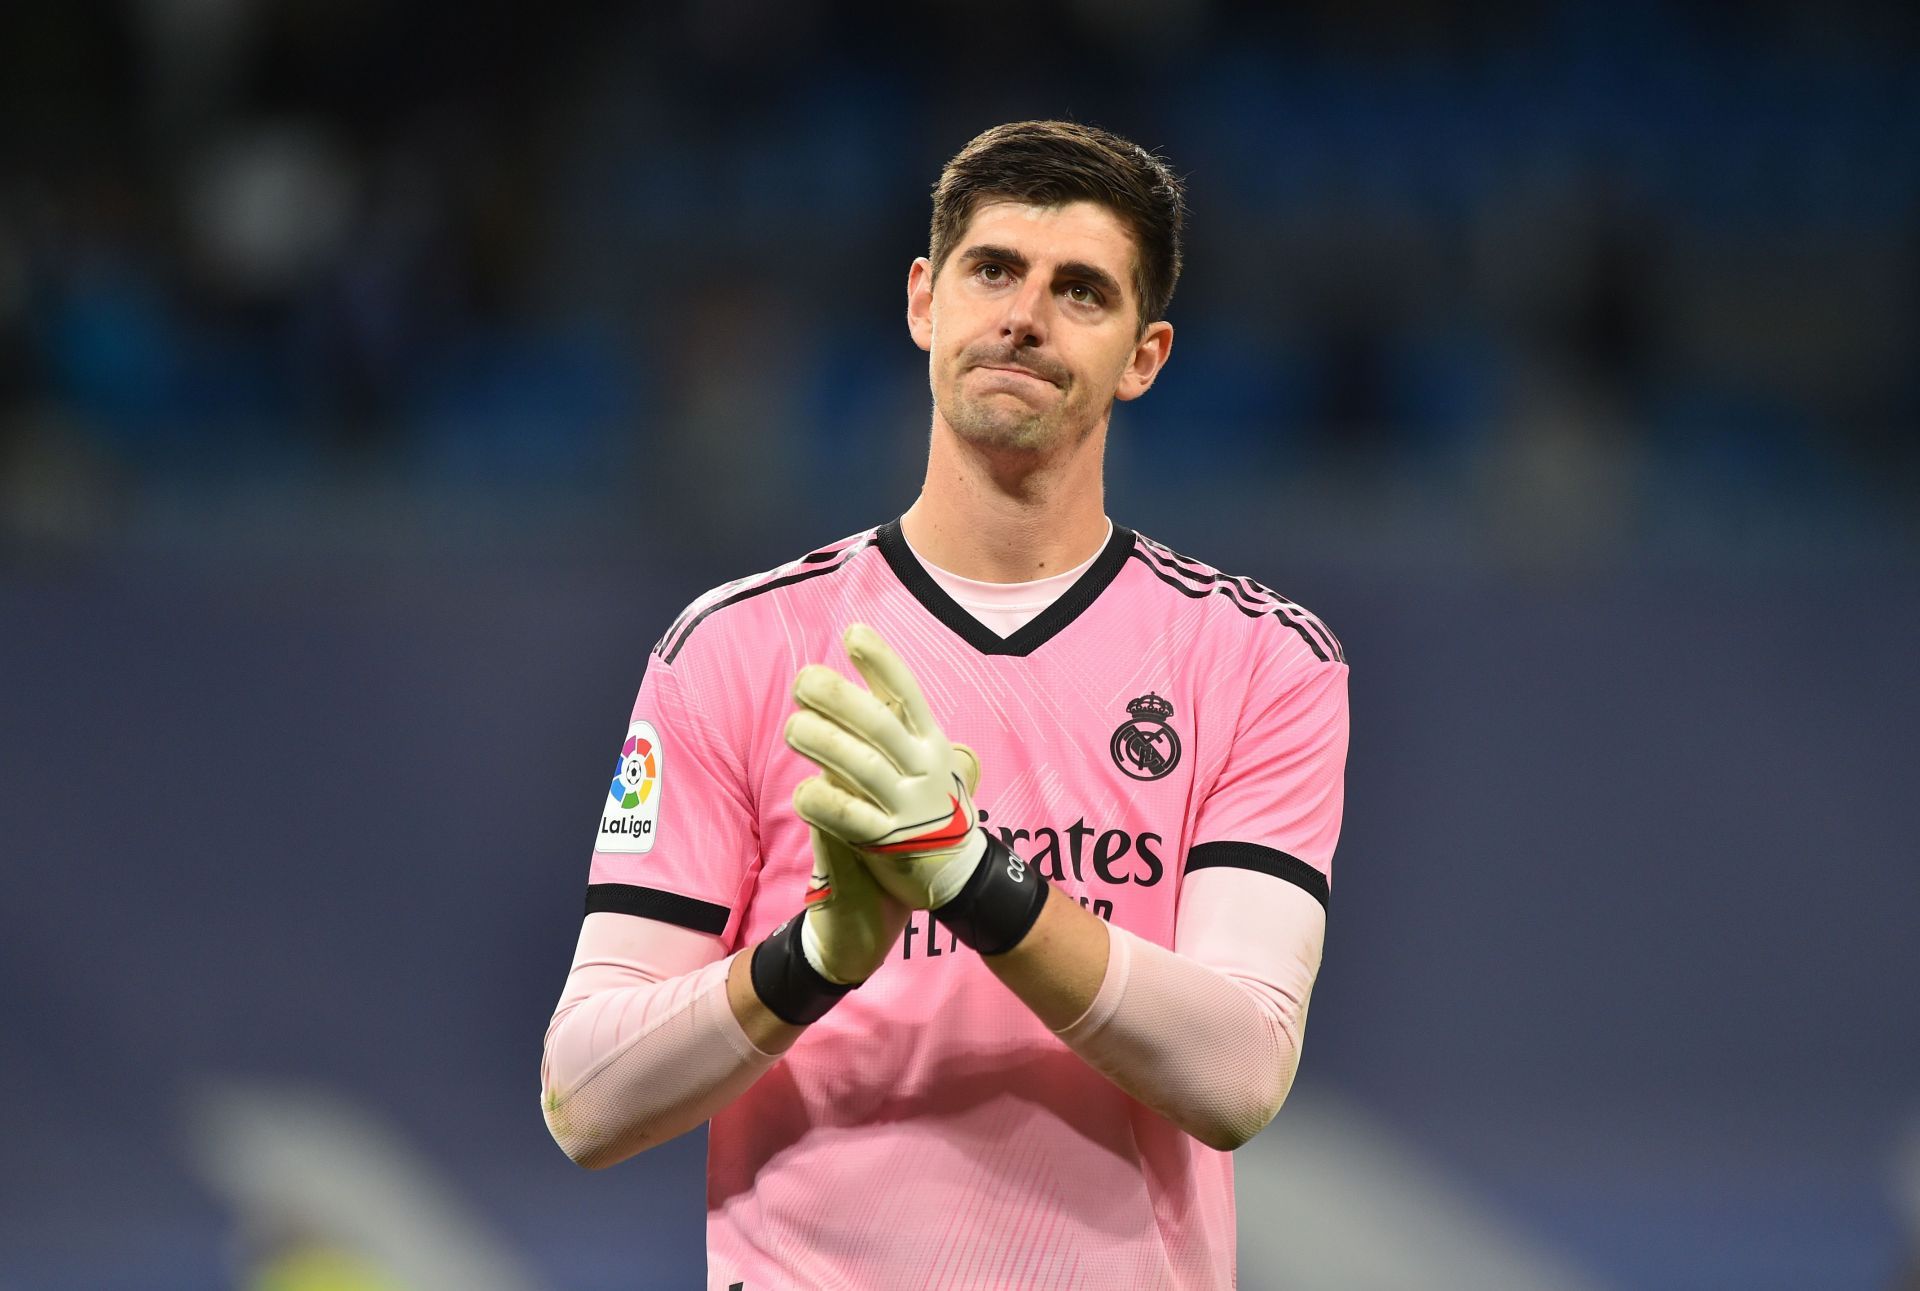 Thibaut Courtois has performed admirably this season.